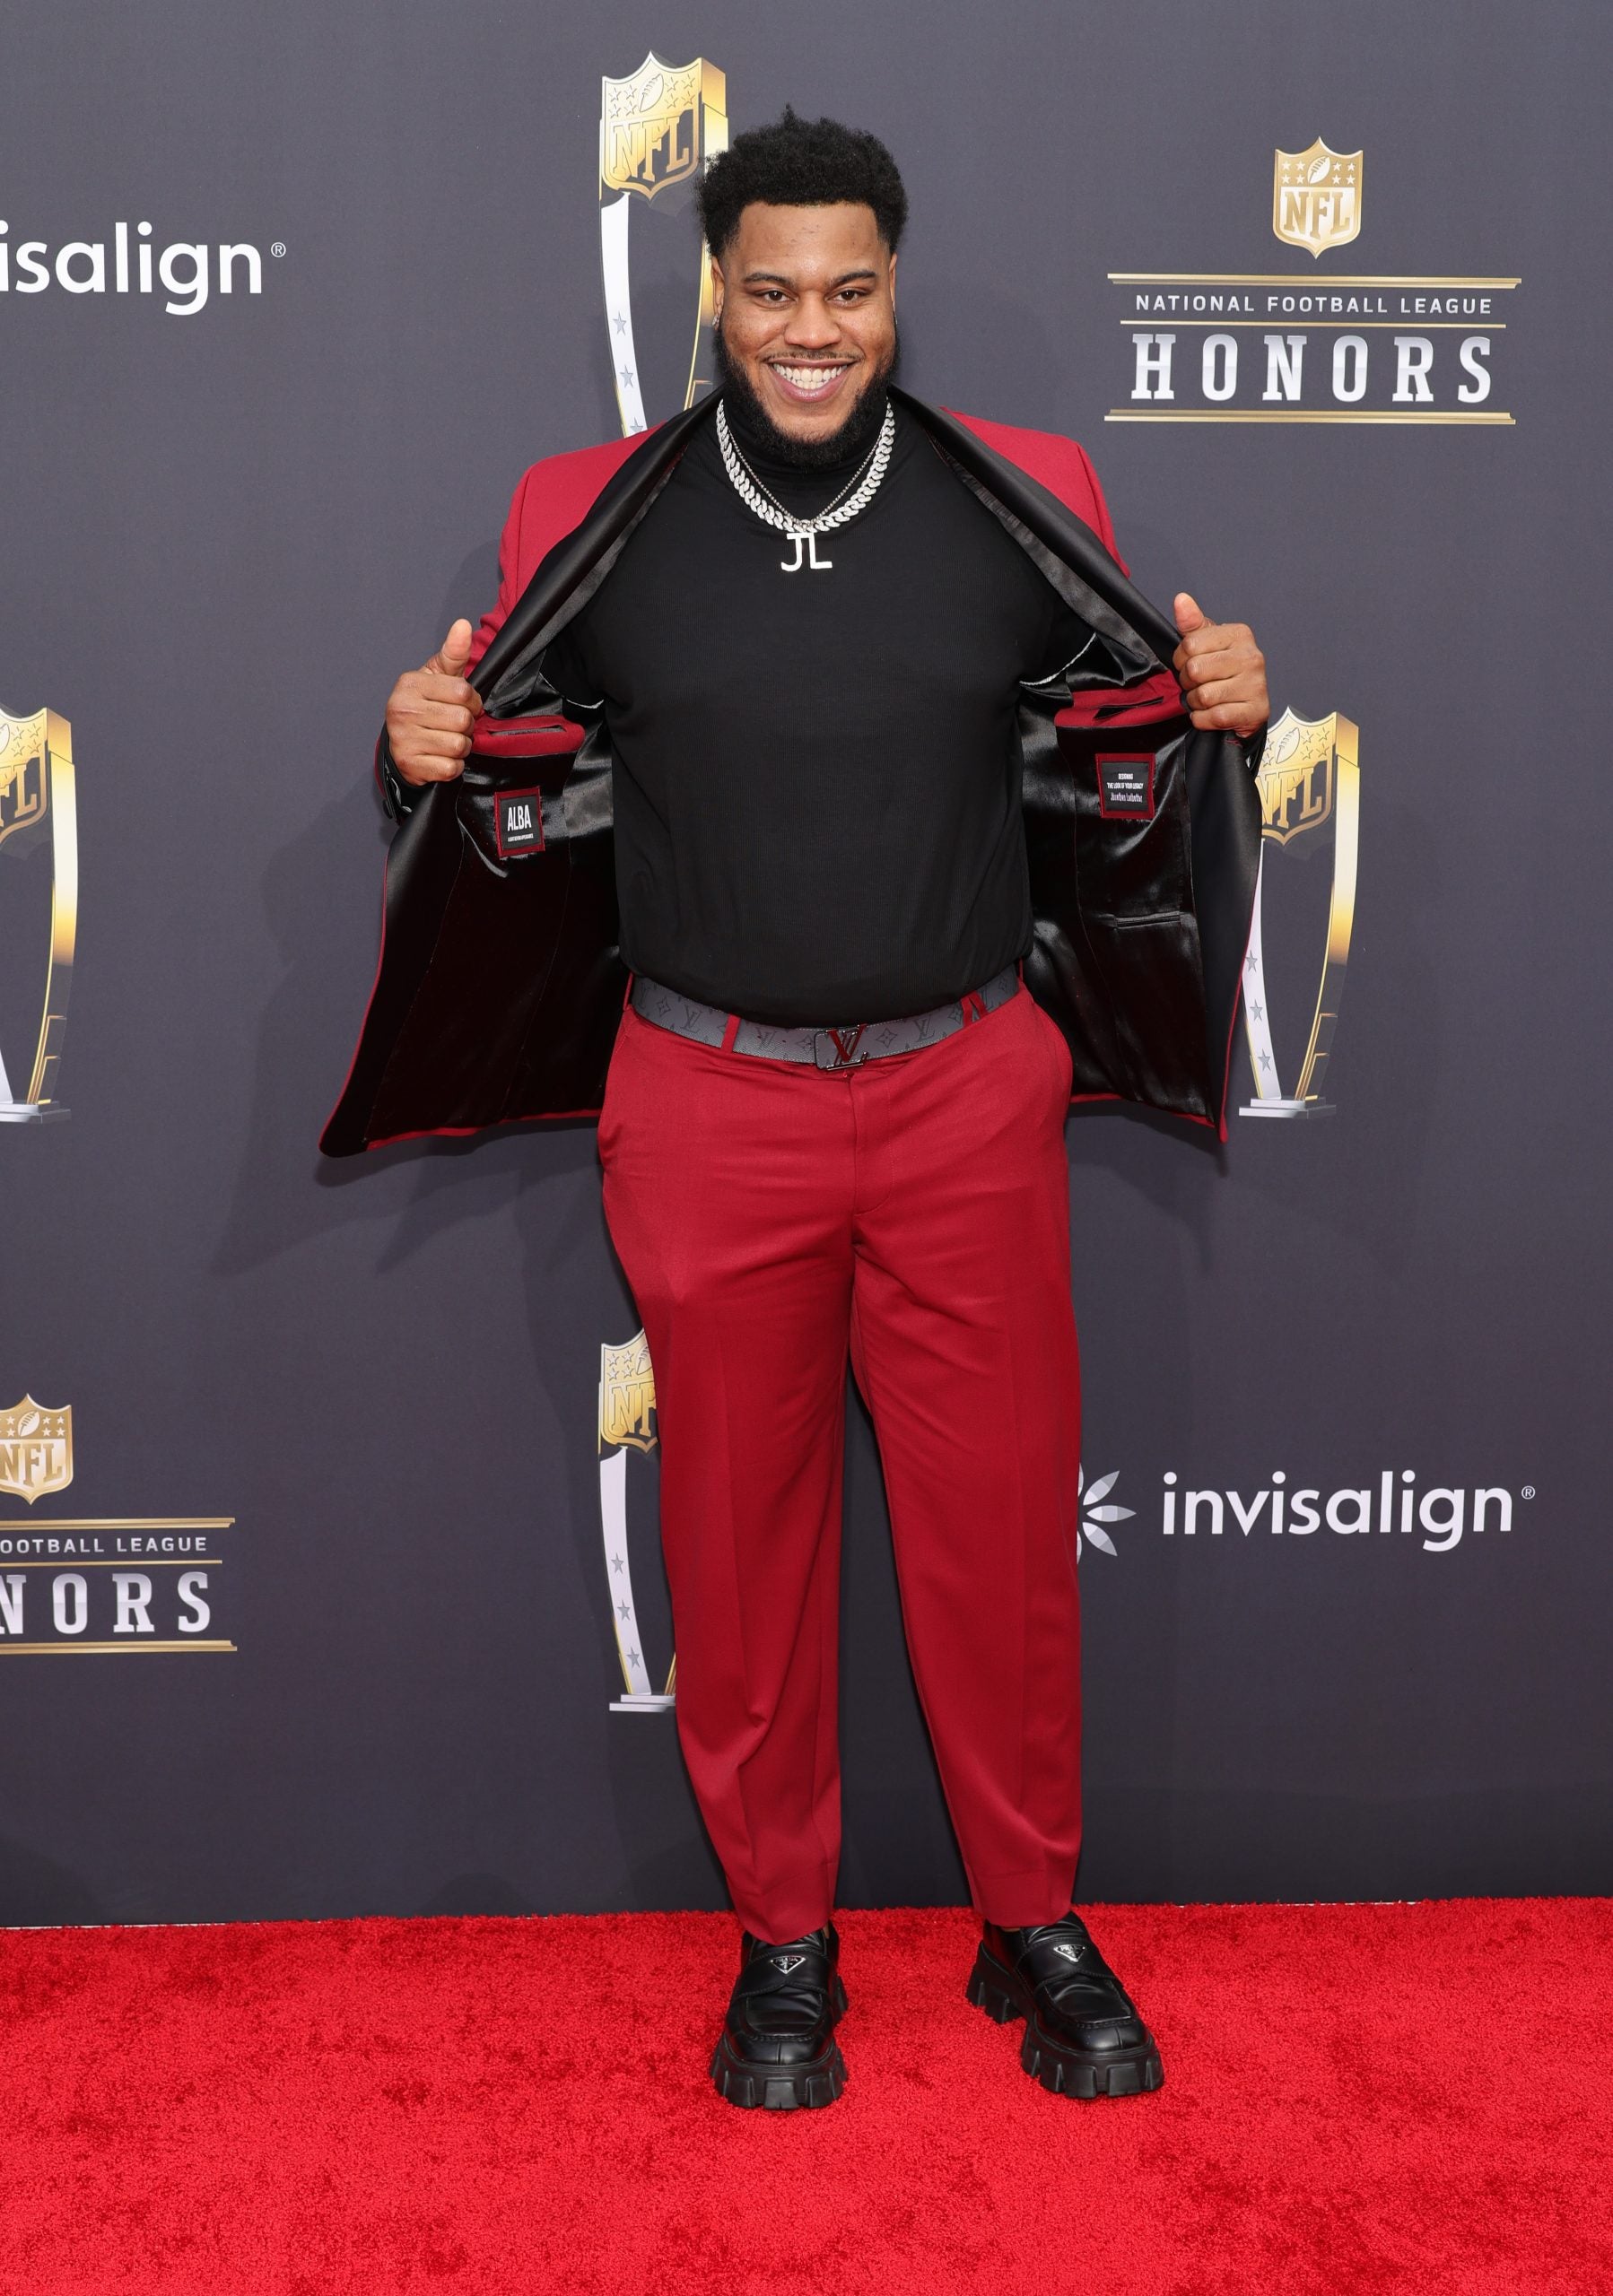 The Best Looks At The 13th Annual NFL Honors